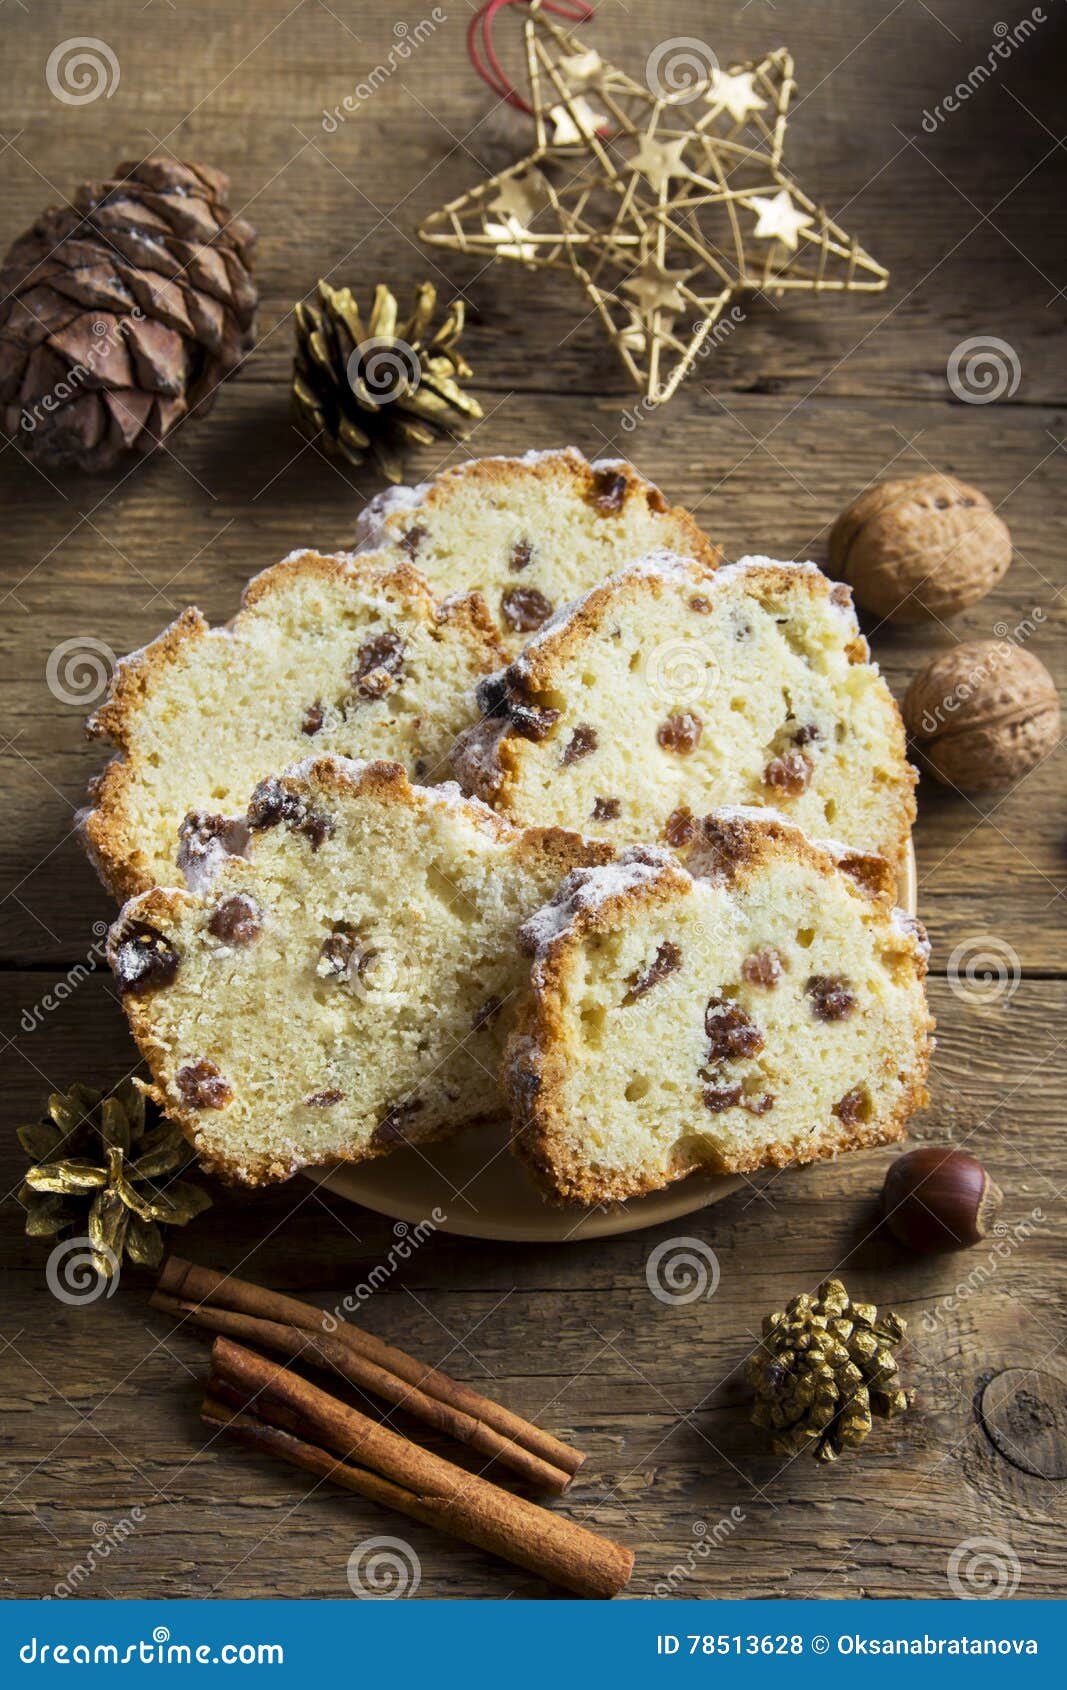 Christmas fruit bread stock photo. Image of gourmet, loaf - 78513628